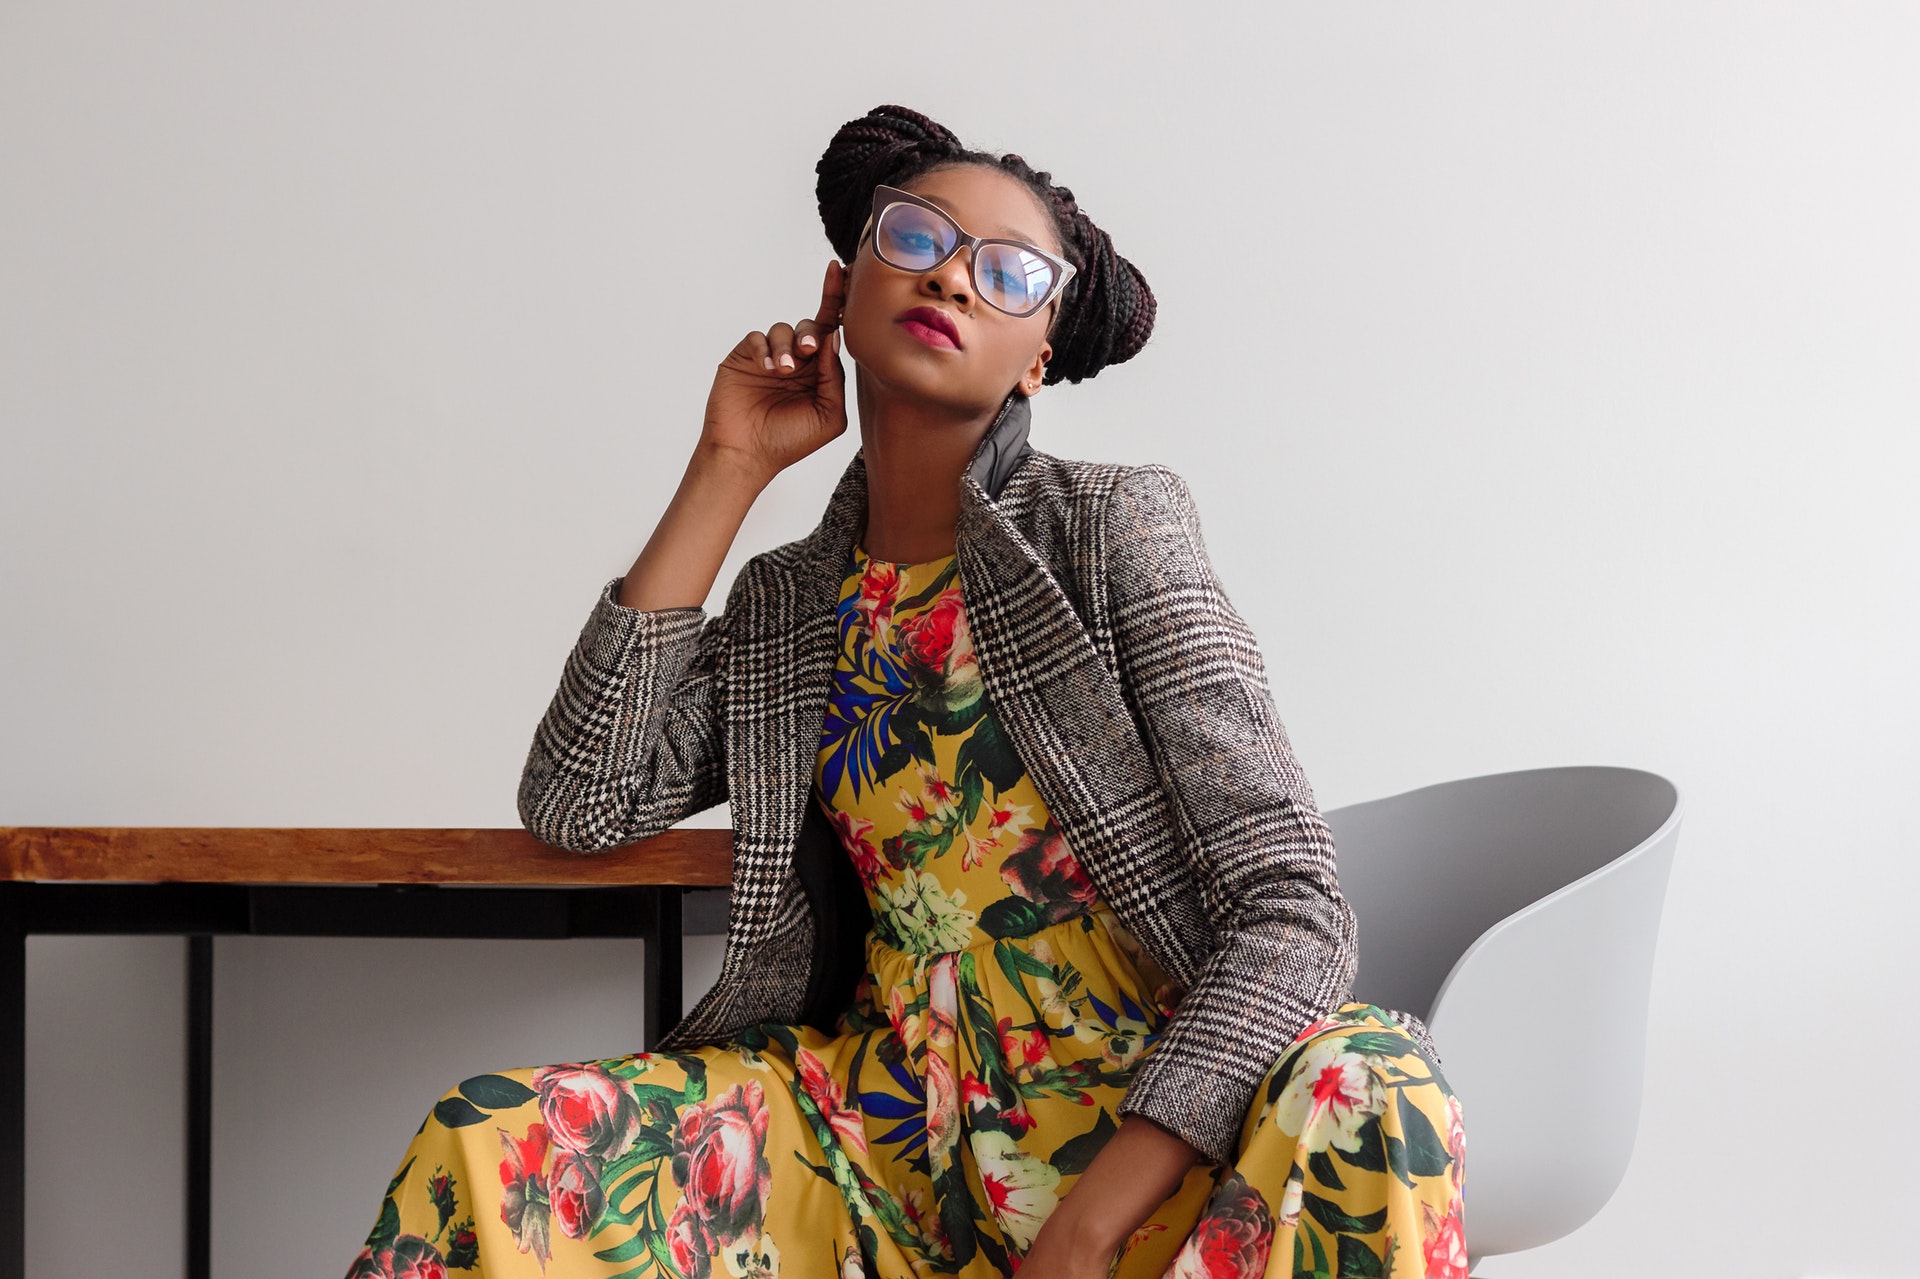 Black woman wearing glasses sitting in a floral dress with grey blazer